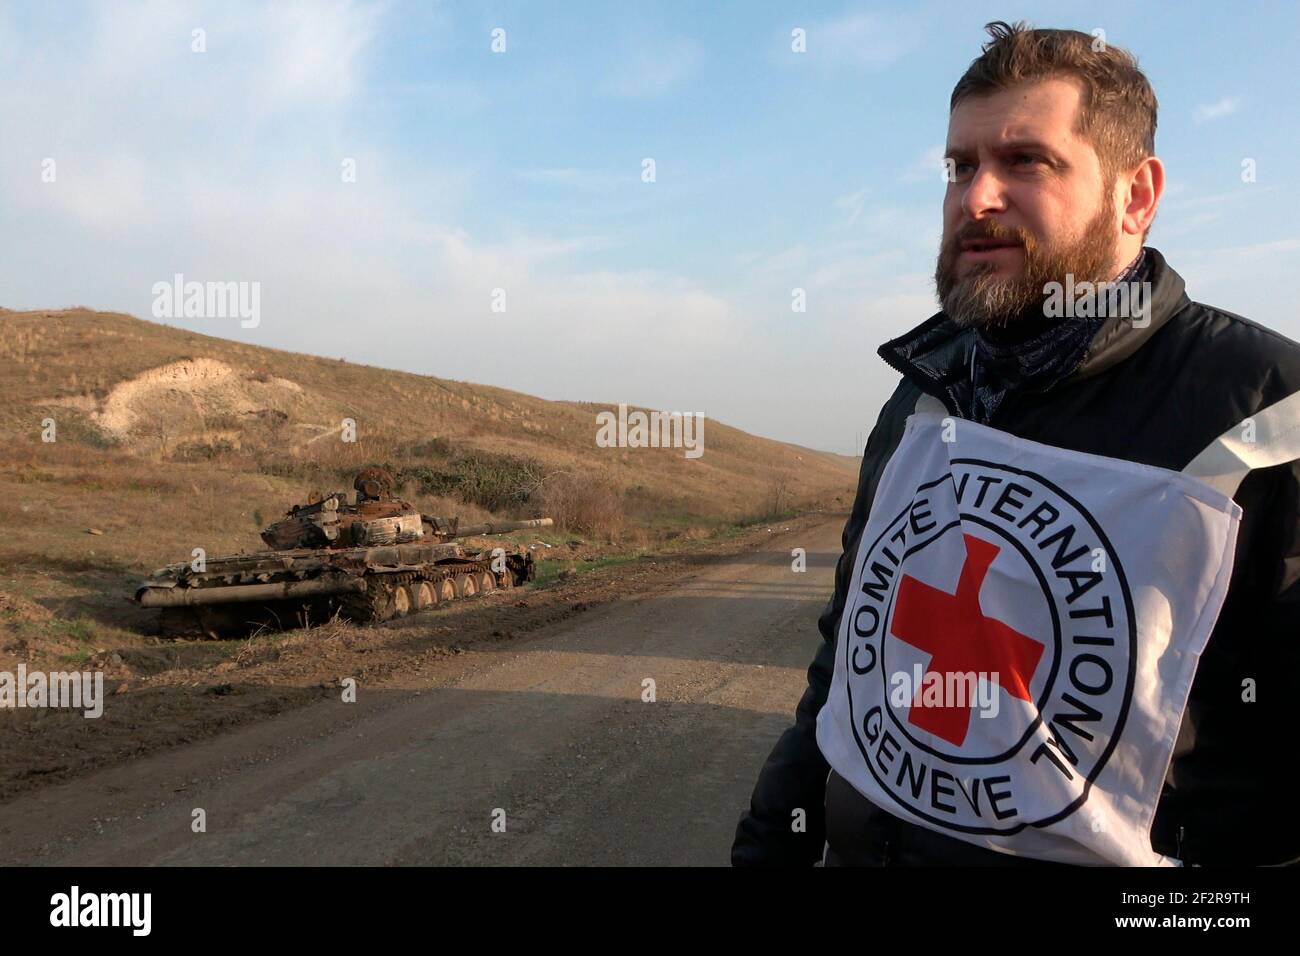 JABRAYIL, AZERBAIJAN - DECEMBER 15: A member of the International Committee of the Red Cross stands next to a destroyed Armenian T-72 tank after looking for remains of Armenian fighters killed in the conflict over the disputed region of Nagorno-Karabakh on December 15 2020 in the Jabrayil Rayon of Azerbaijan. Heavy clashes erupted over Nagorno-Karabakh in late September during which more than 5,600 people, including civilians, were killed. The sides agreed to a Russia-brokered cease-fire deal that took effect on November 10 Stock Photo